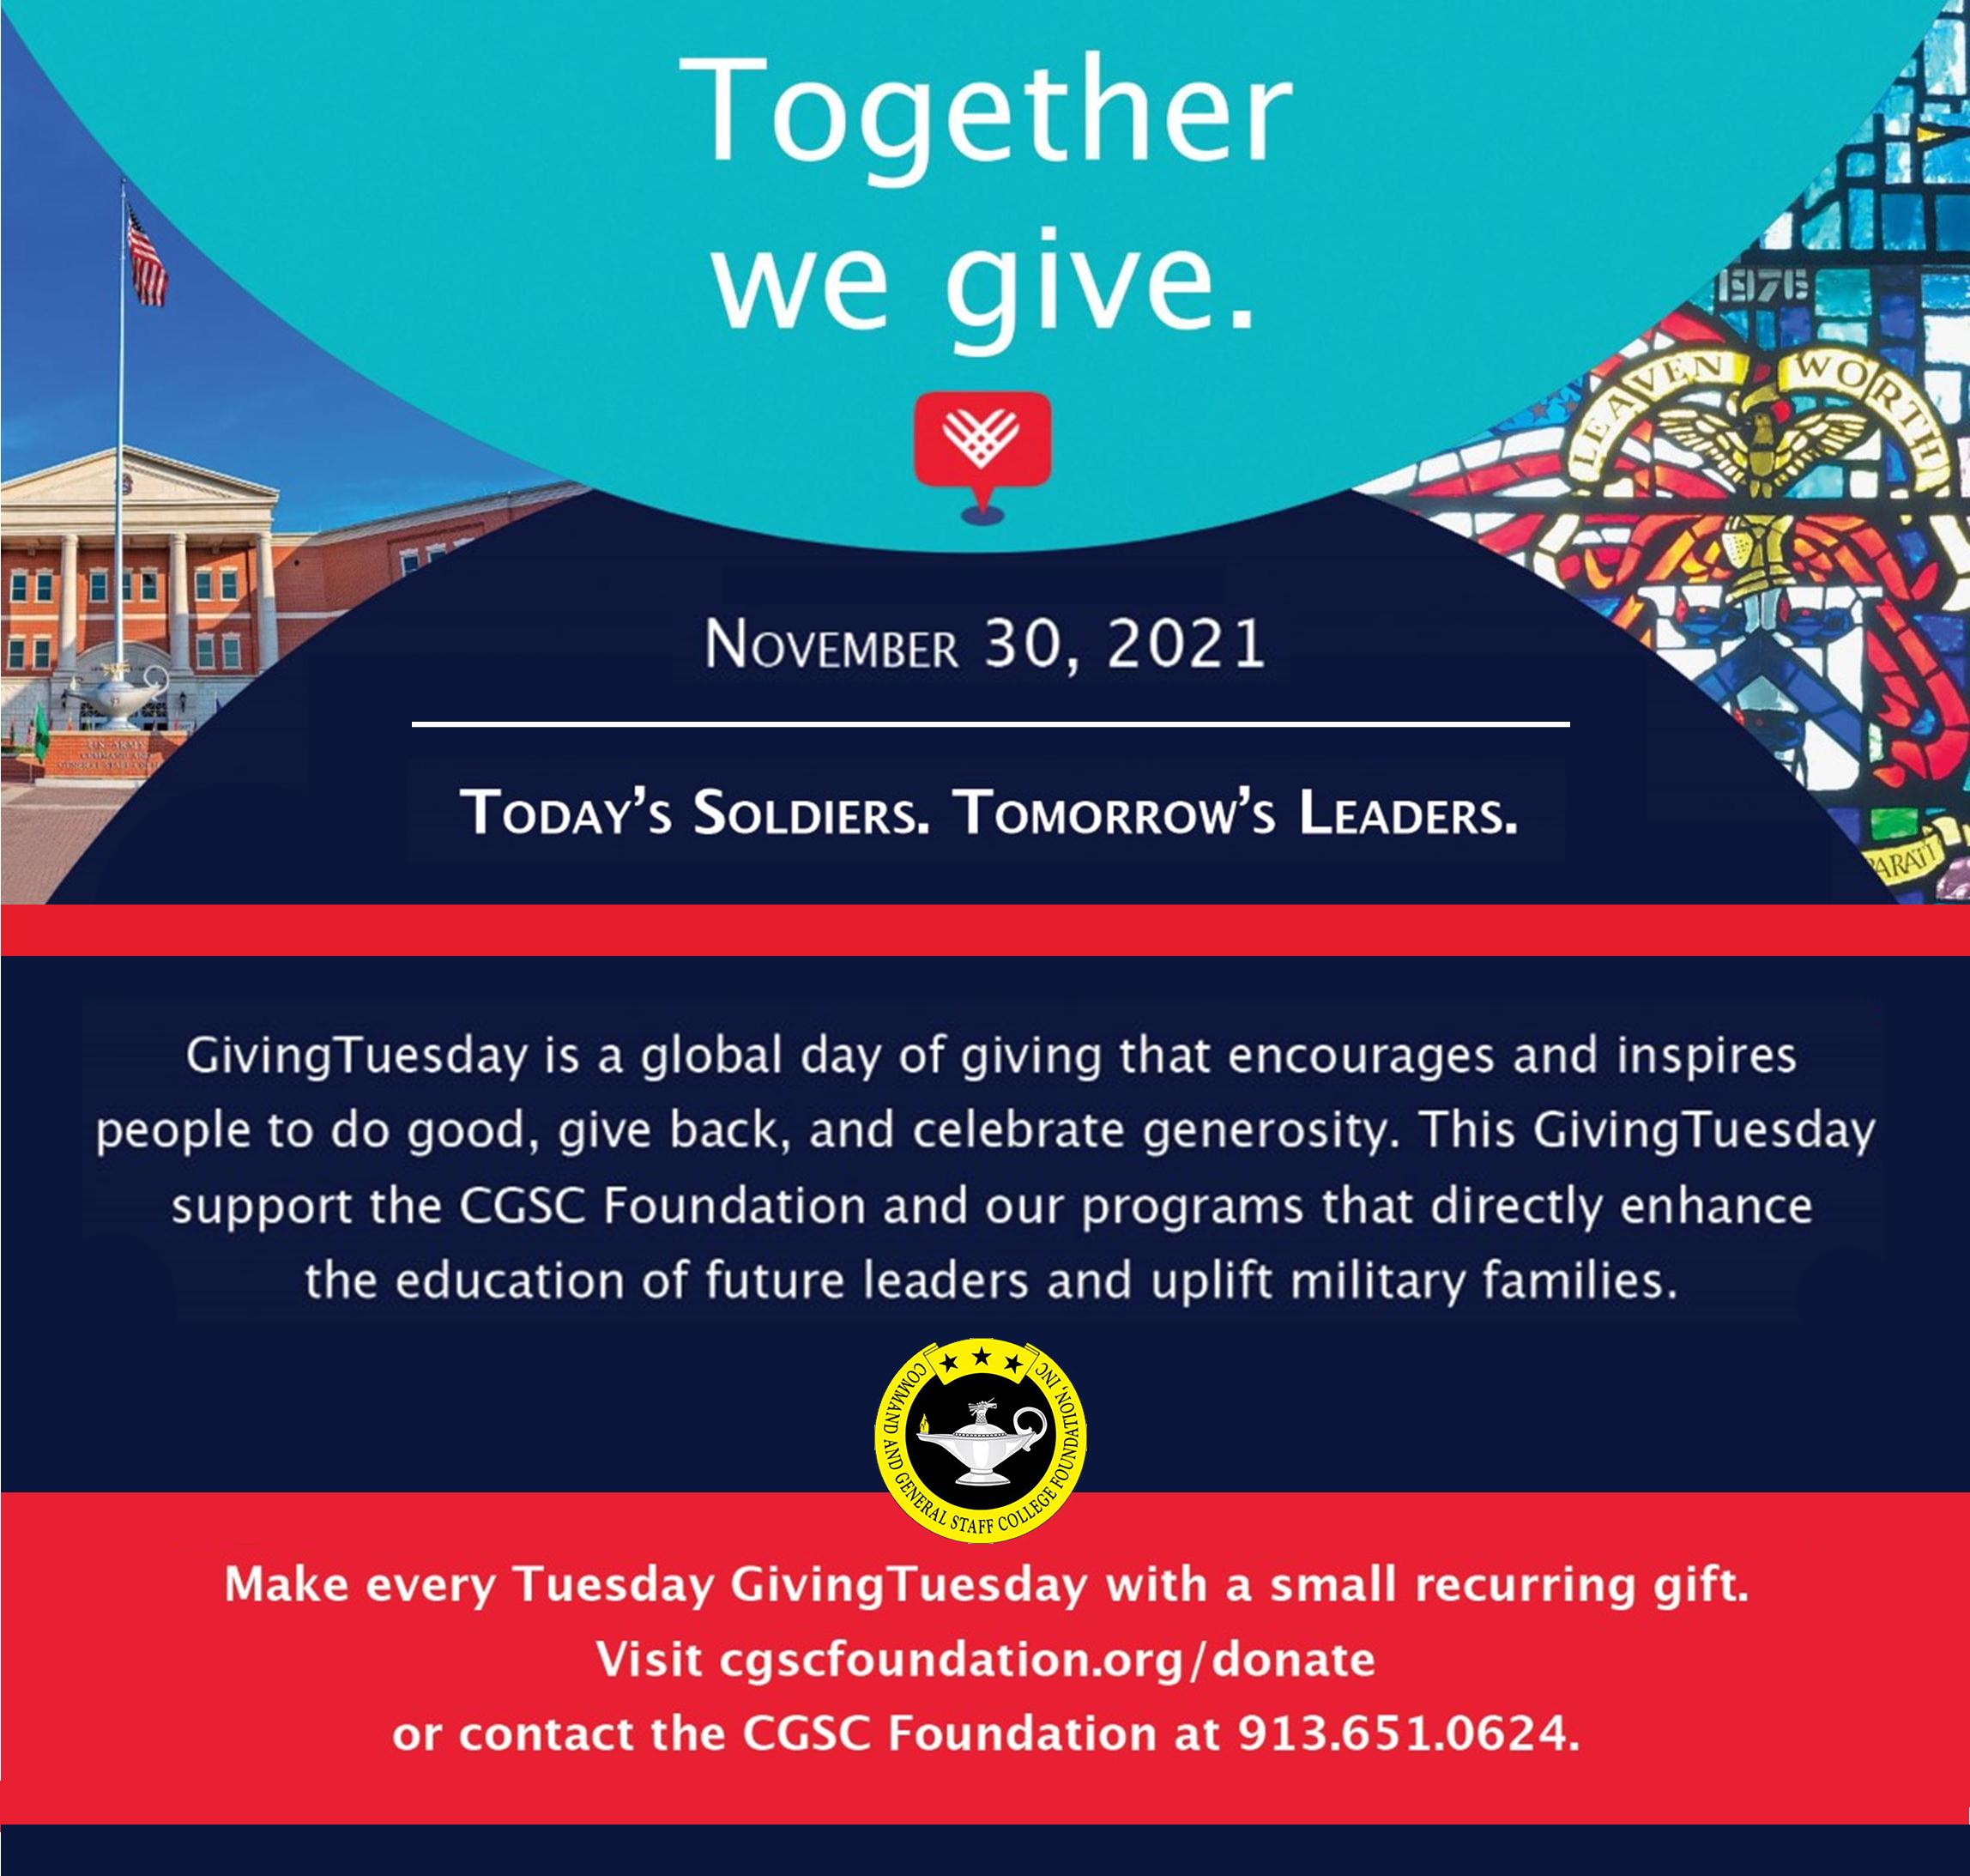 Together we give. For today’s Soldiers. For tomorrow’s Leaders.